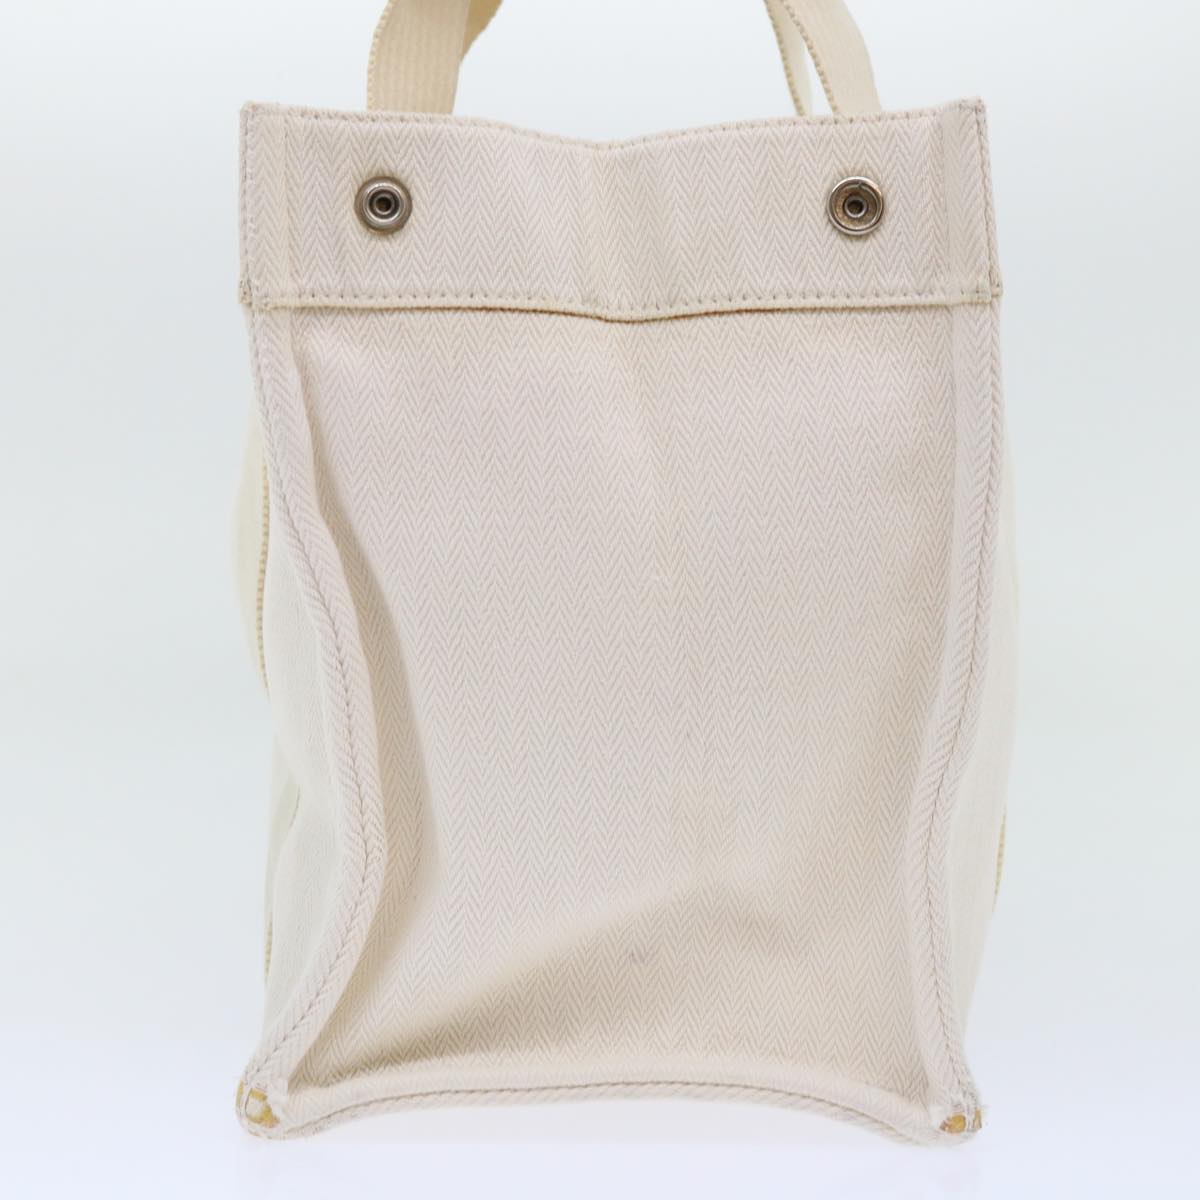 HERMES Cannes PM Tote Bag cotton White Cream Auth 51874